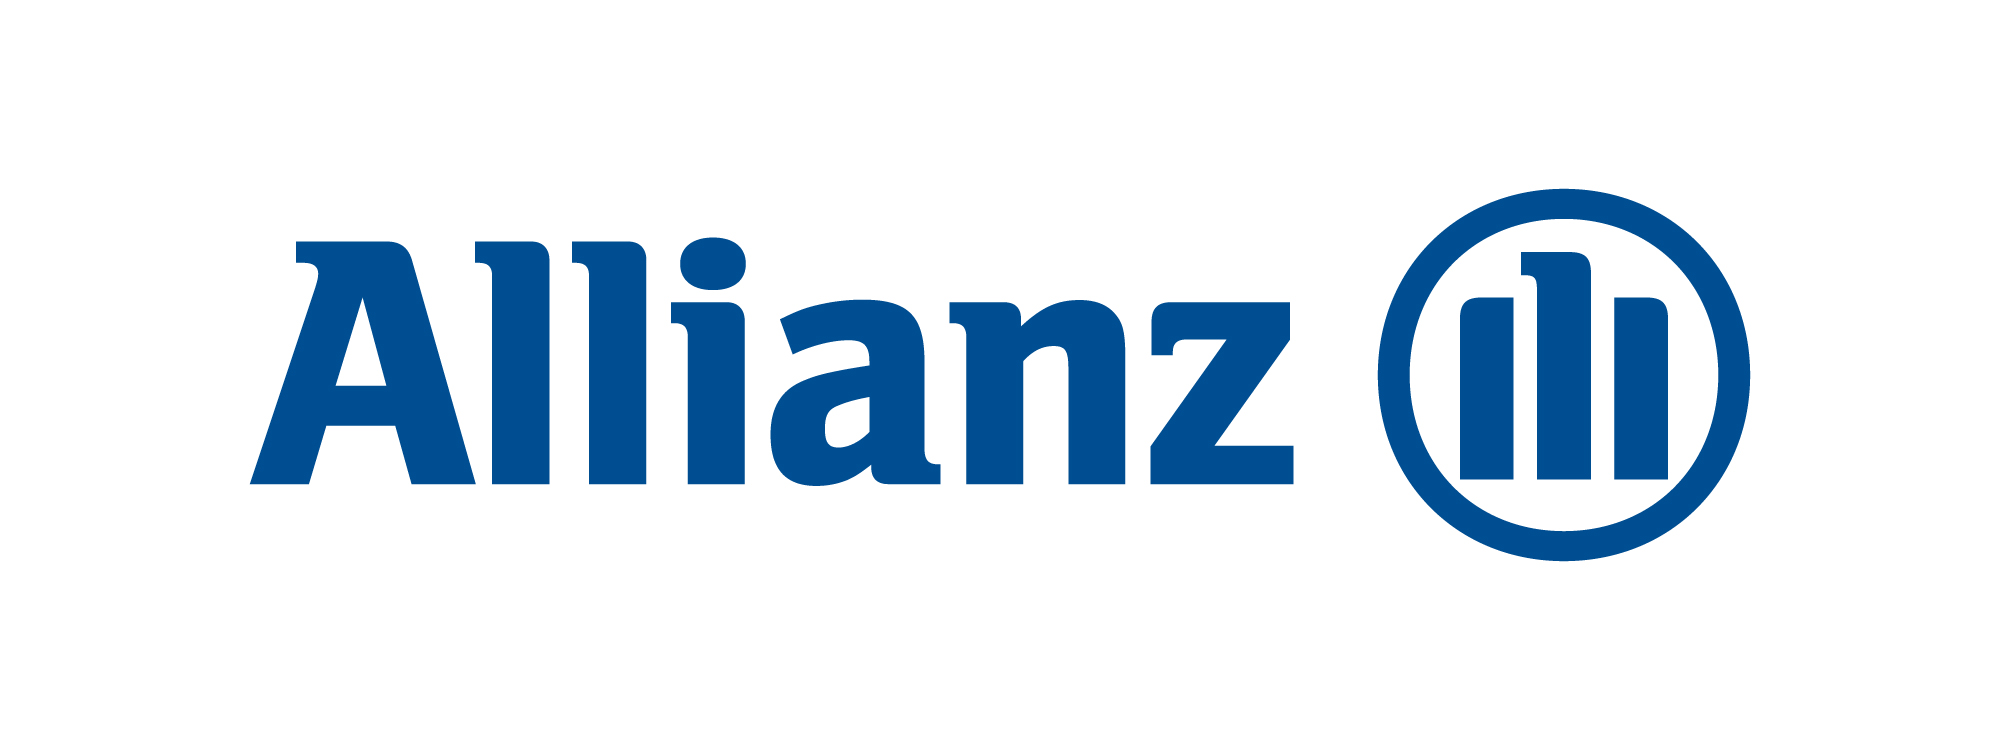 Allianz signs 10-year exclusive life insurance distribution agreement with HSBC in Asia